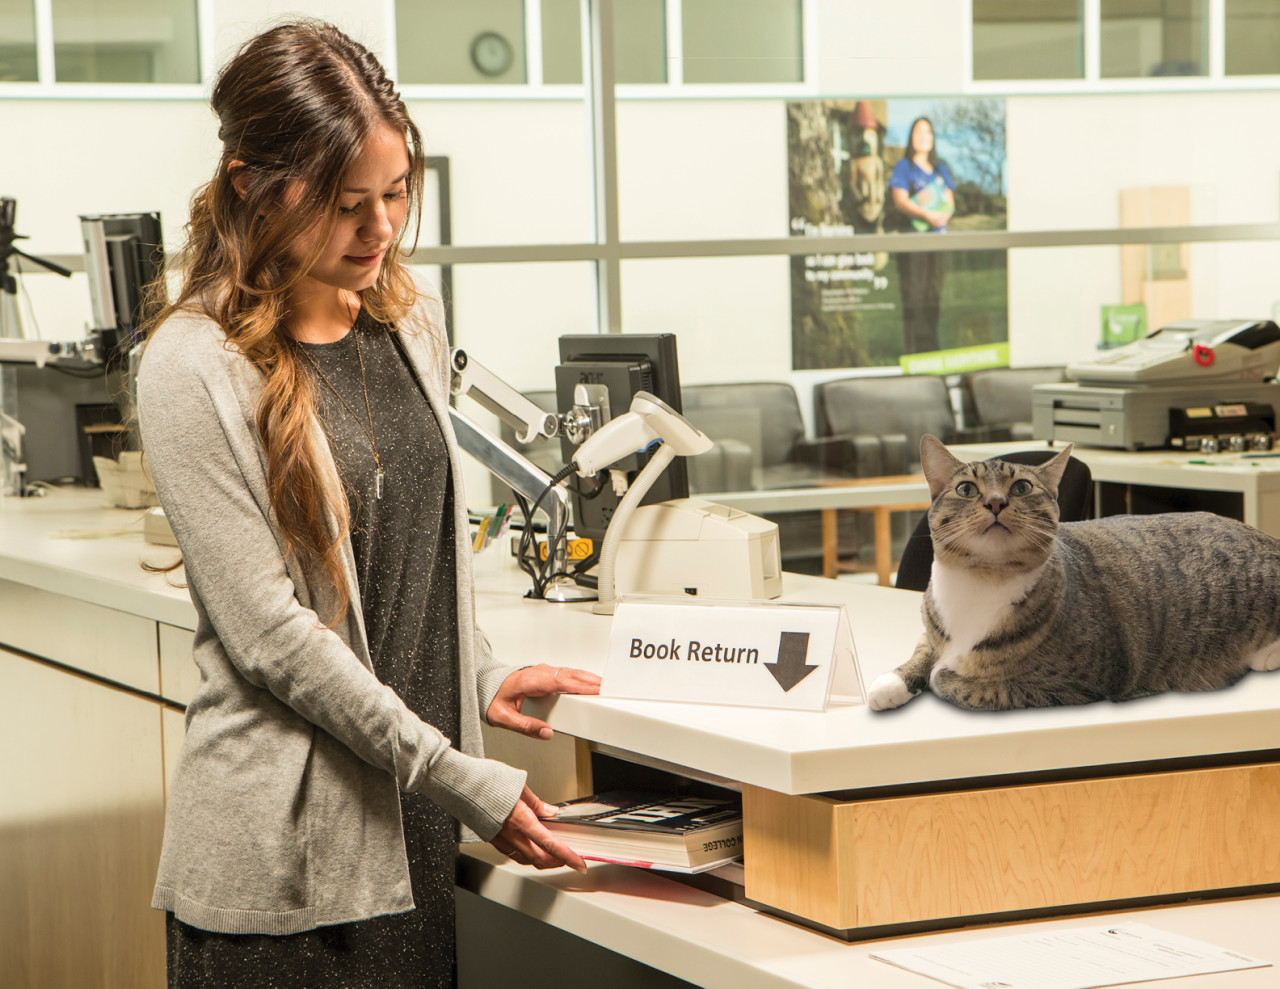 A young woman places a text book in the slot marked 'book return'. A photshopped cat is on top of the counter and appears to be looking at the camera.